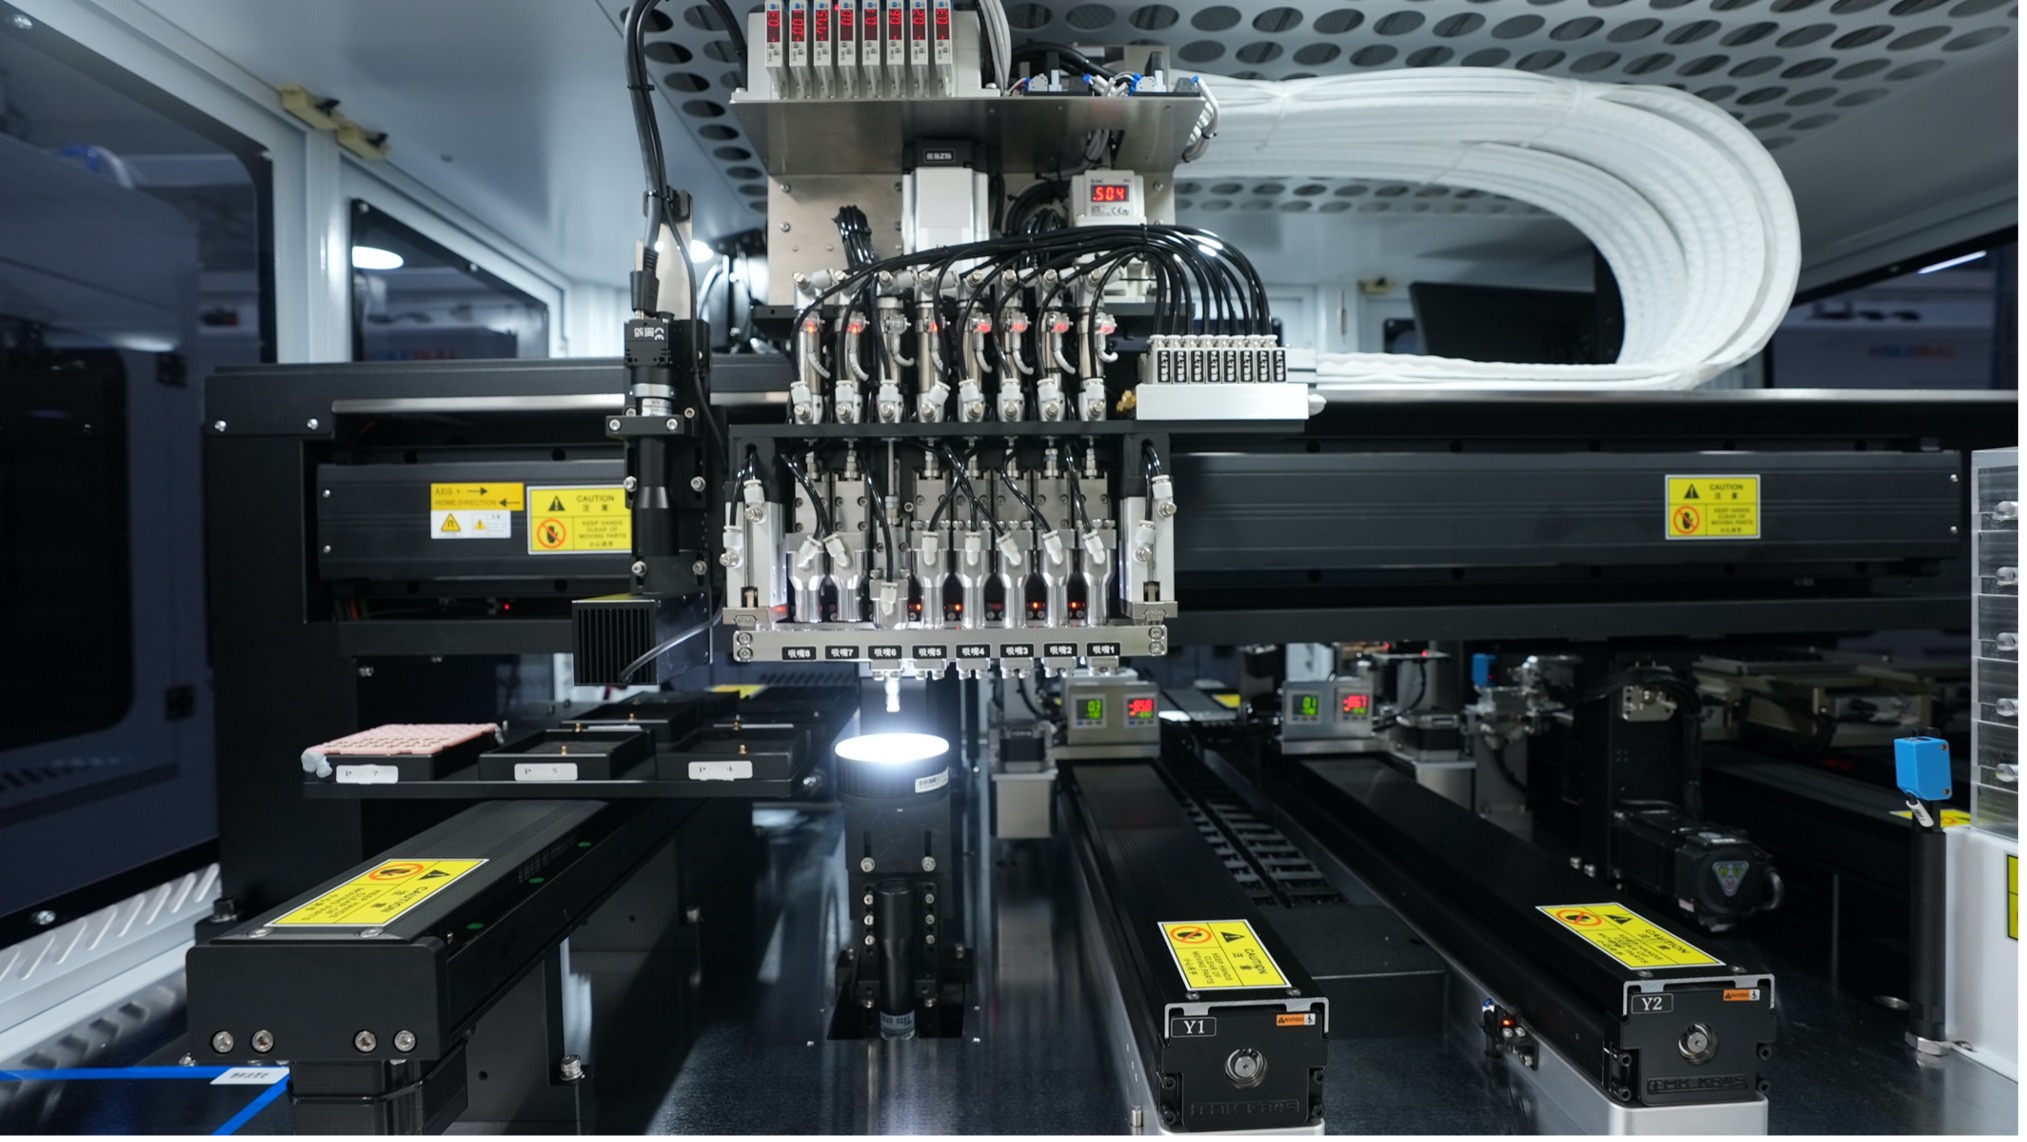 Manufacture machine on the production line of Ningbo Novel Optical in east China's Zhejiang Province, May 18, 2023. /CGTN